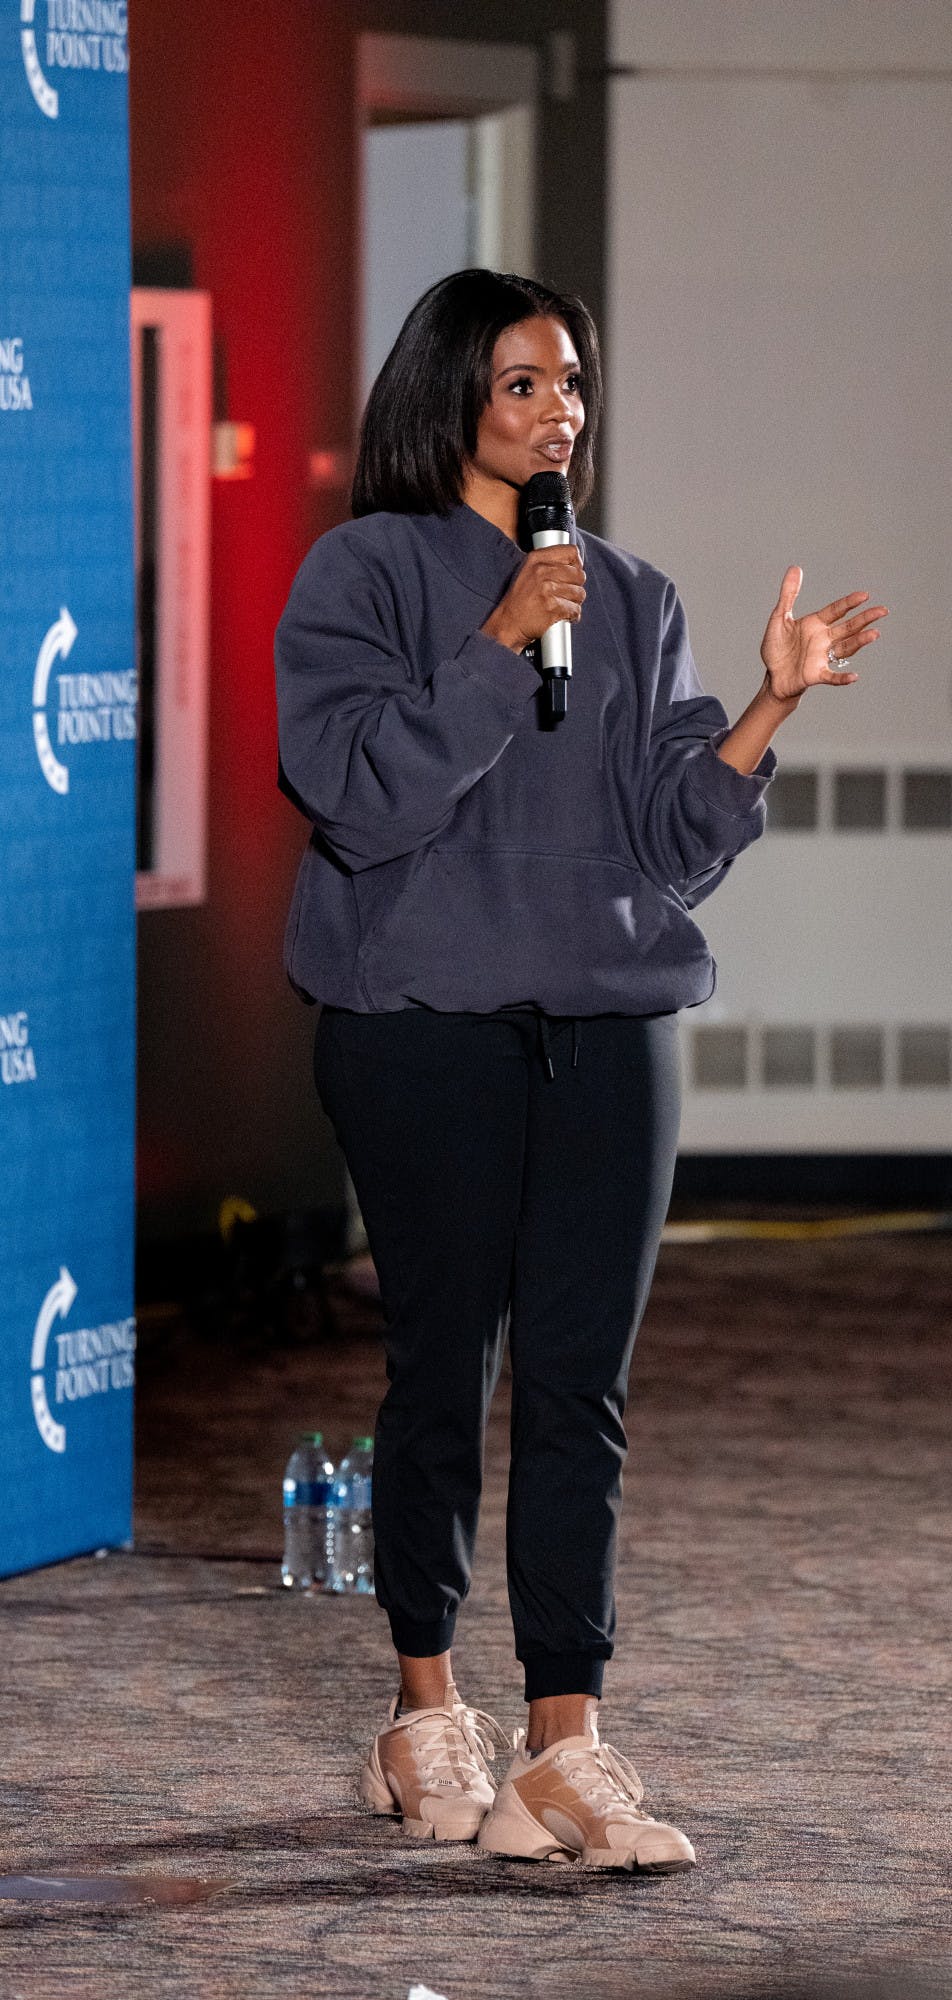 Turning Point MSU hosts speaker Candace Owens, protestors condemn her  ideologies - The State News